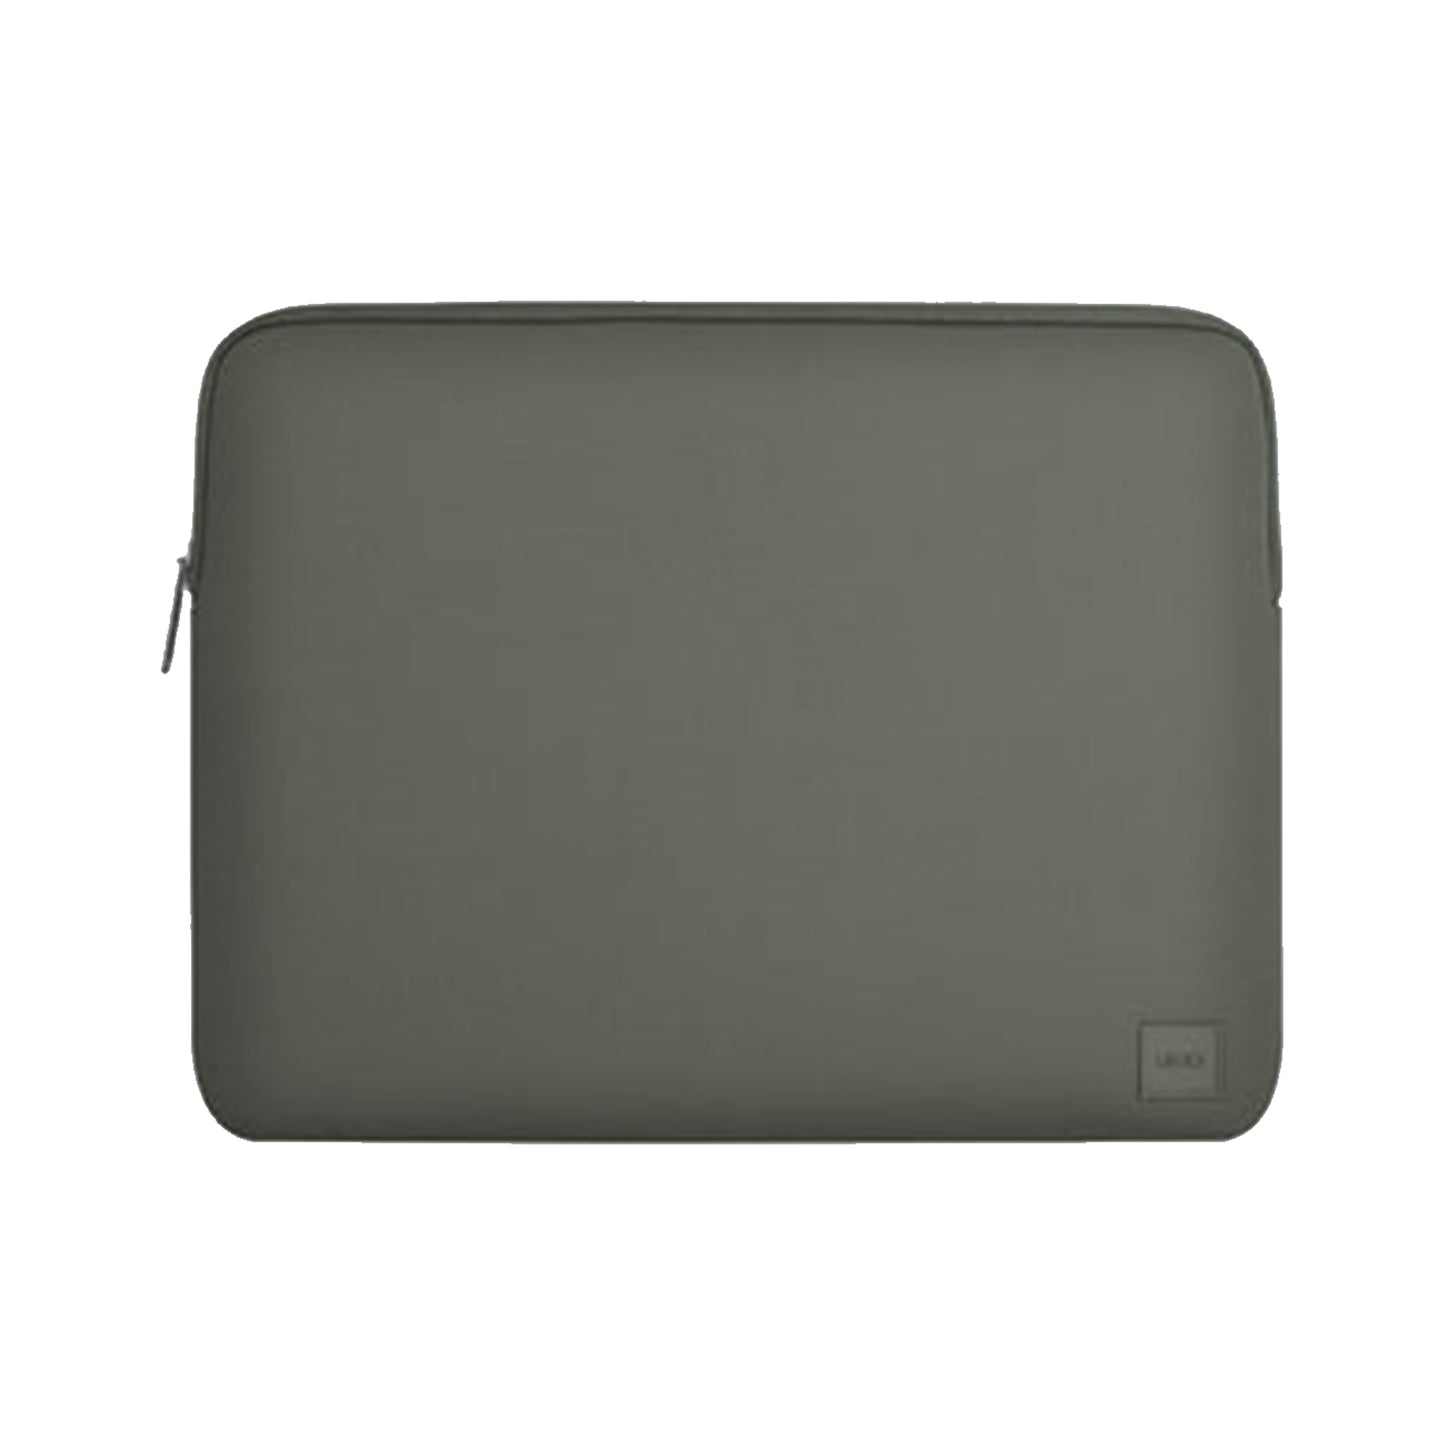 UNIQ Cyprus Laptop and Tablet Sleeve - Water Resistant Neoprene Up to 14" - 14 inch - Pewter Green ( Barcode: 8886463680766 )